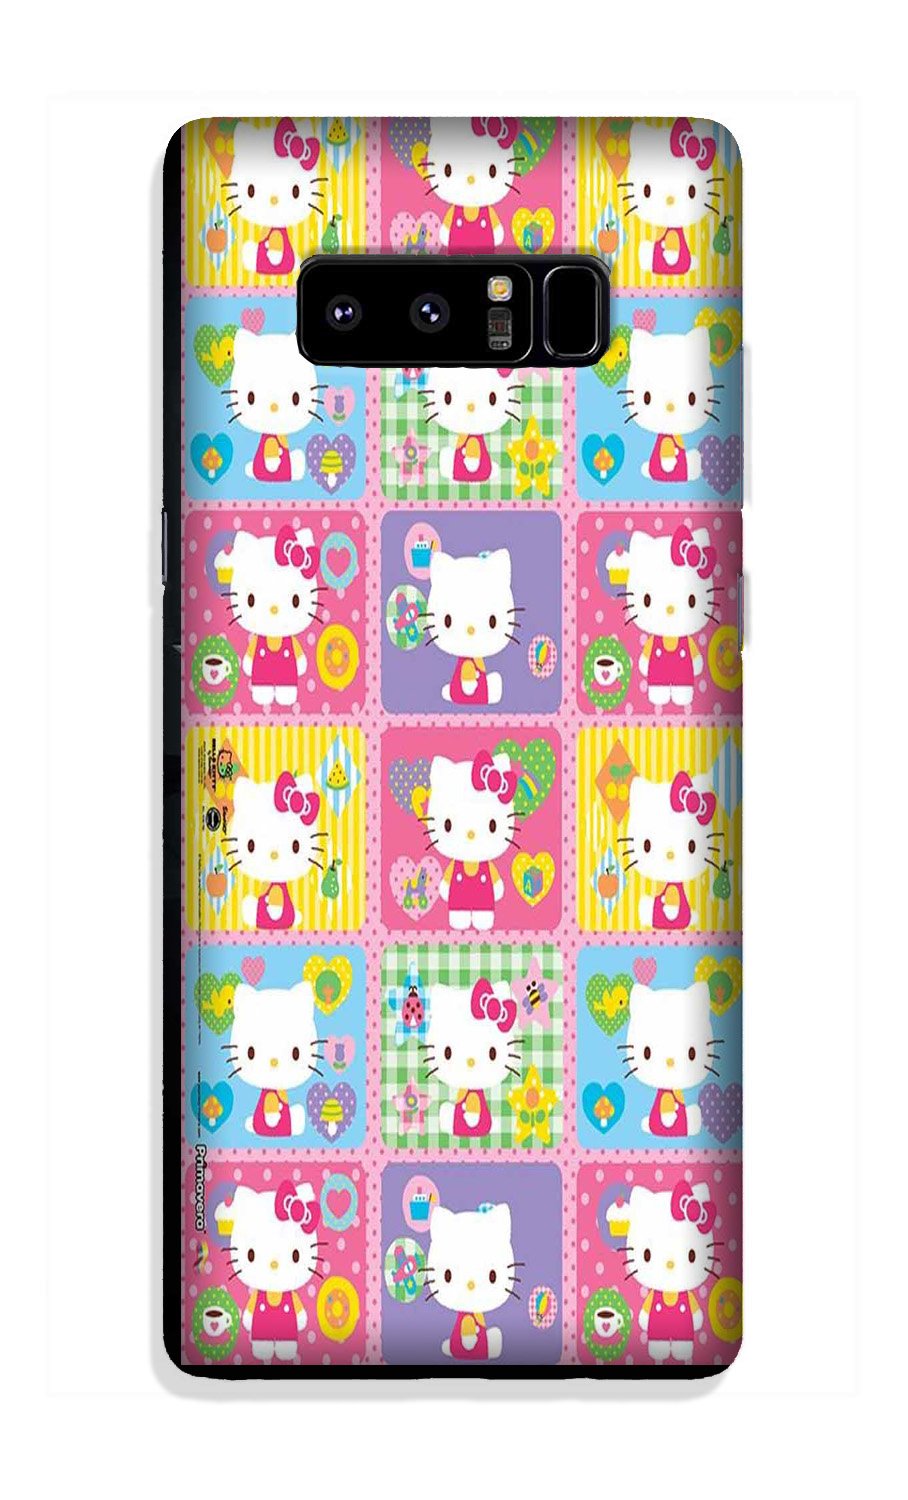 Kitty Mobile Back Case for Galaxy Note 8 (Design - 400)